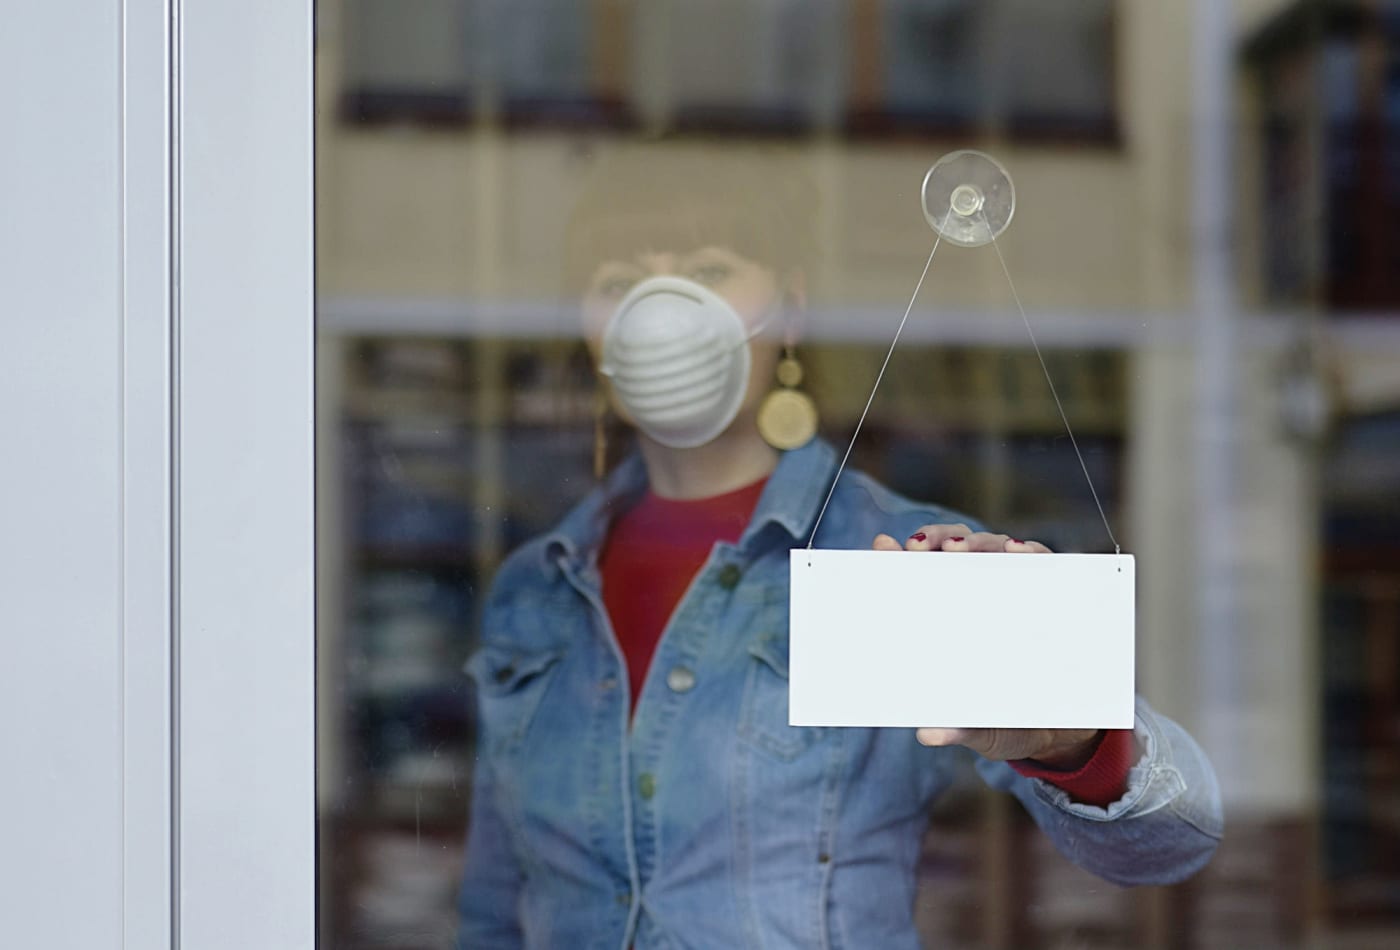 shop keeper with face mask fixing store sign